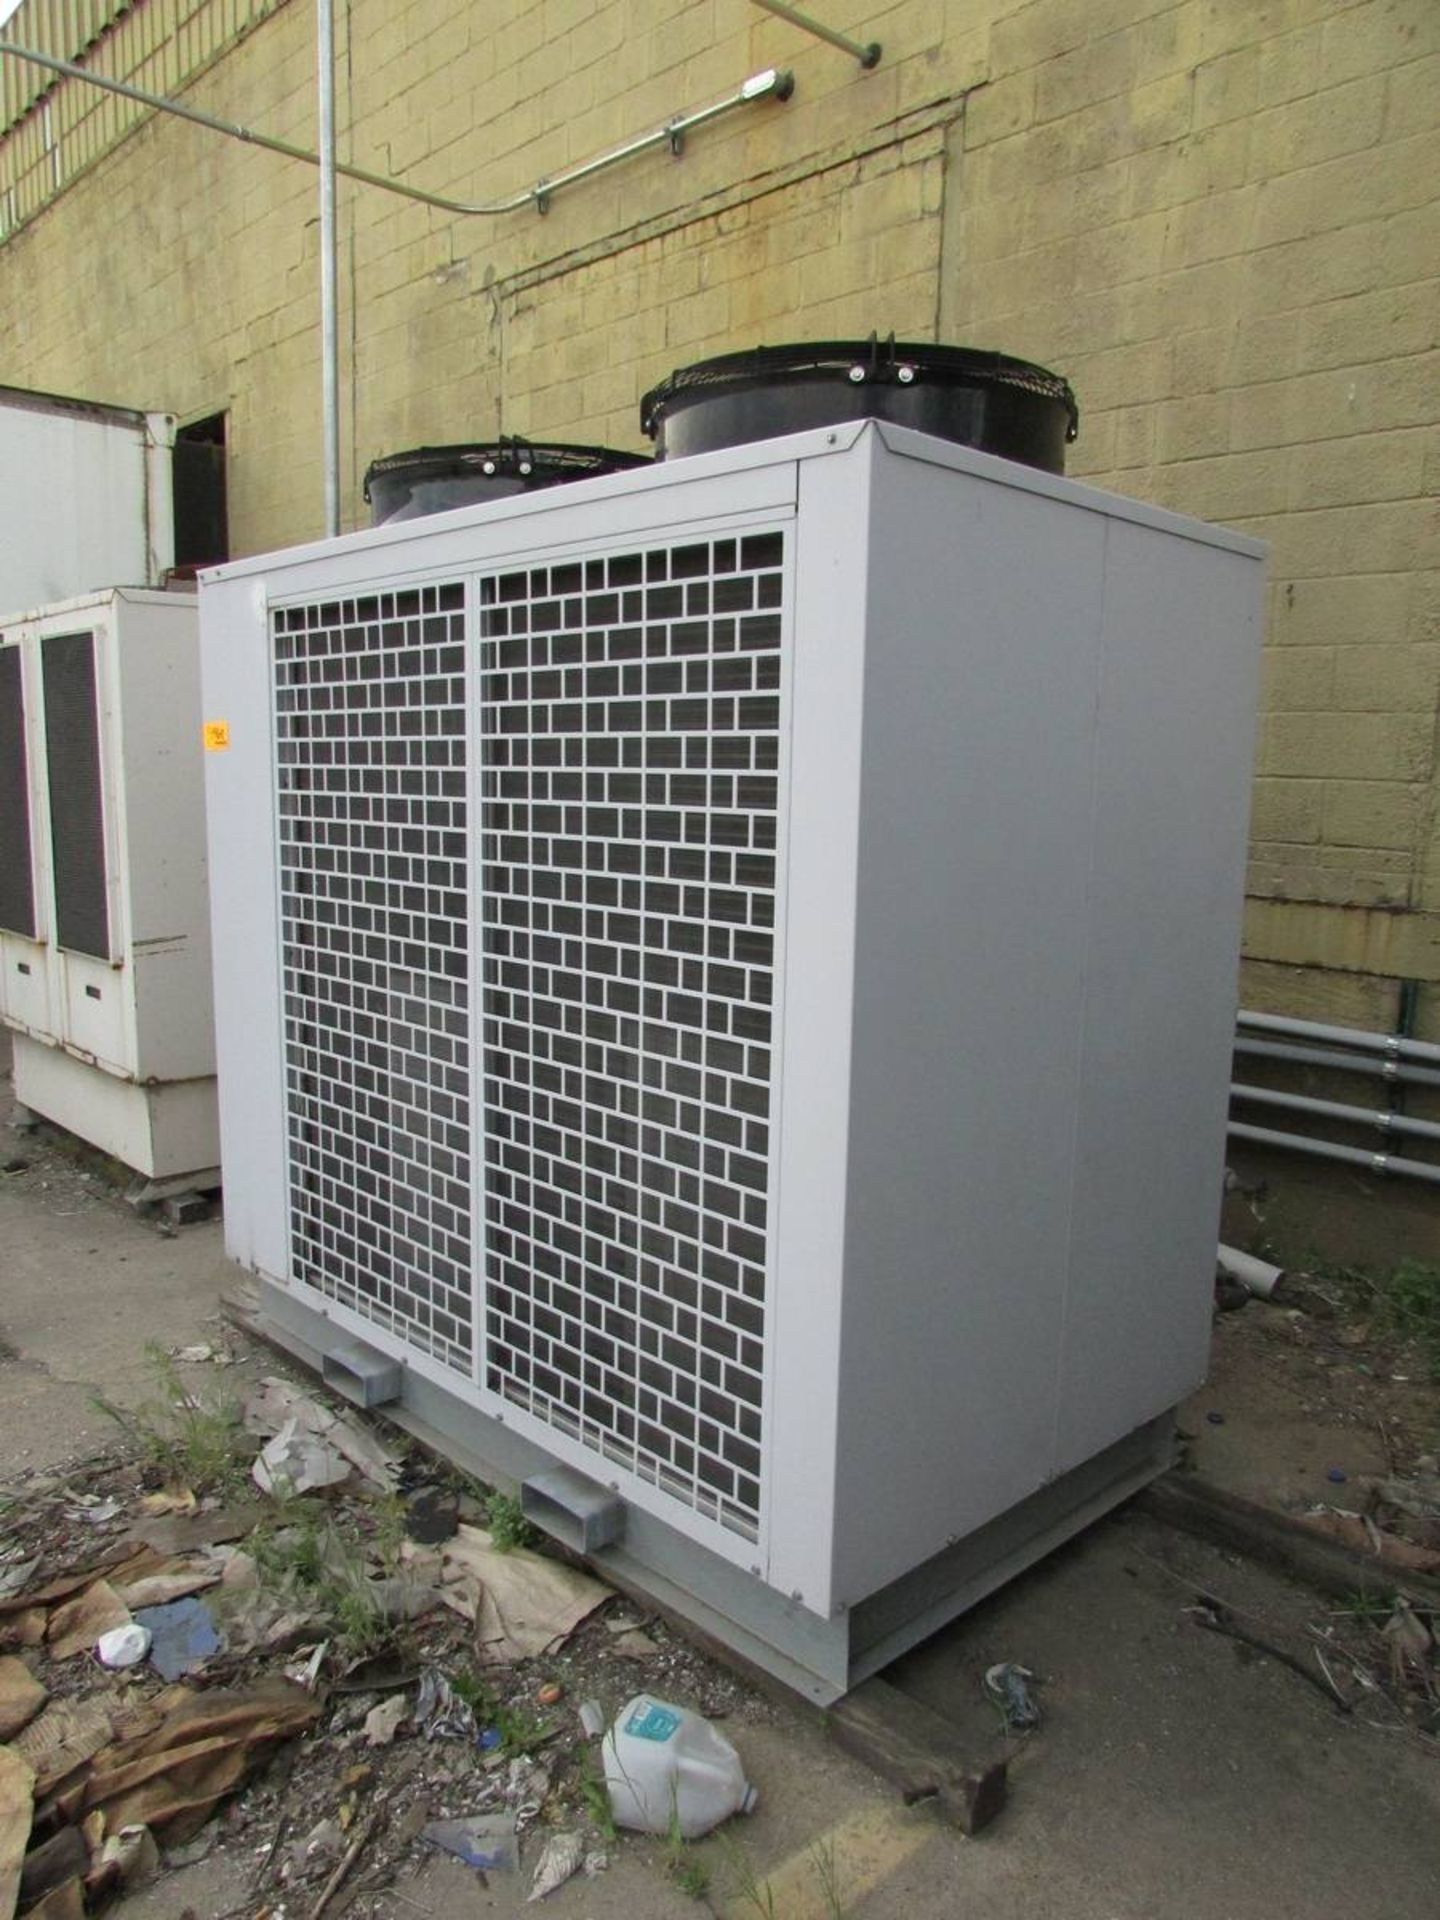 Fluid Chillers Inc AIR 3500 Refrigerated Chiller - Image 3 of 7